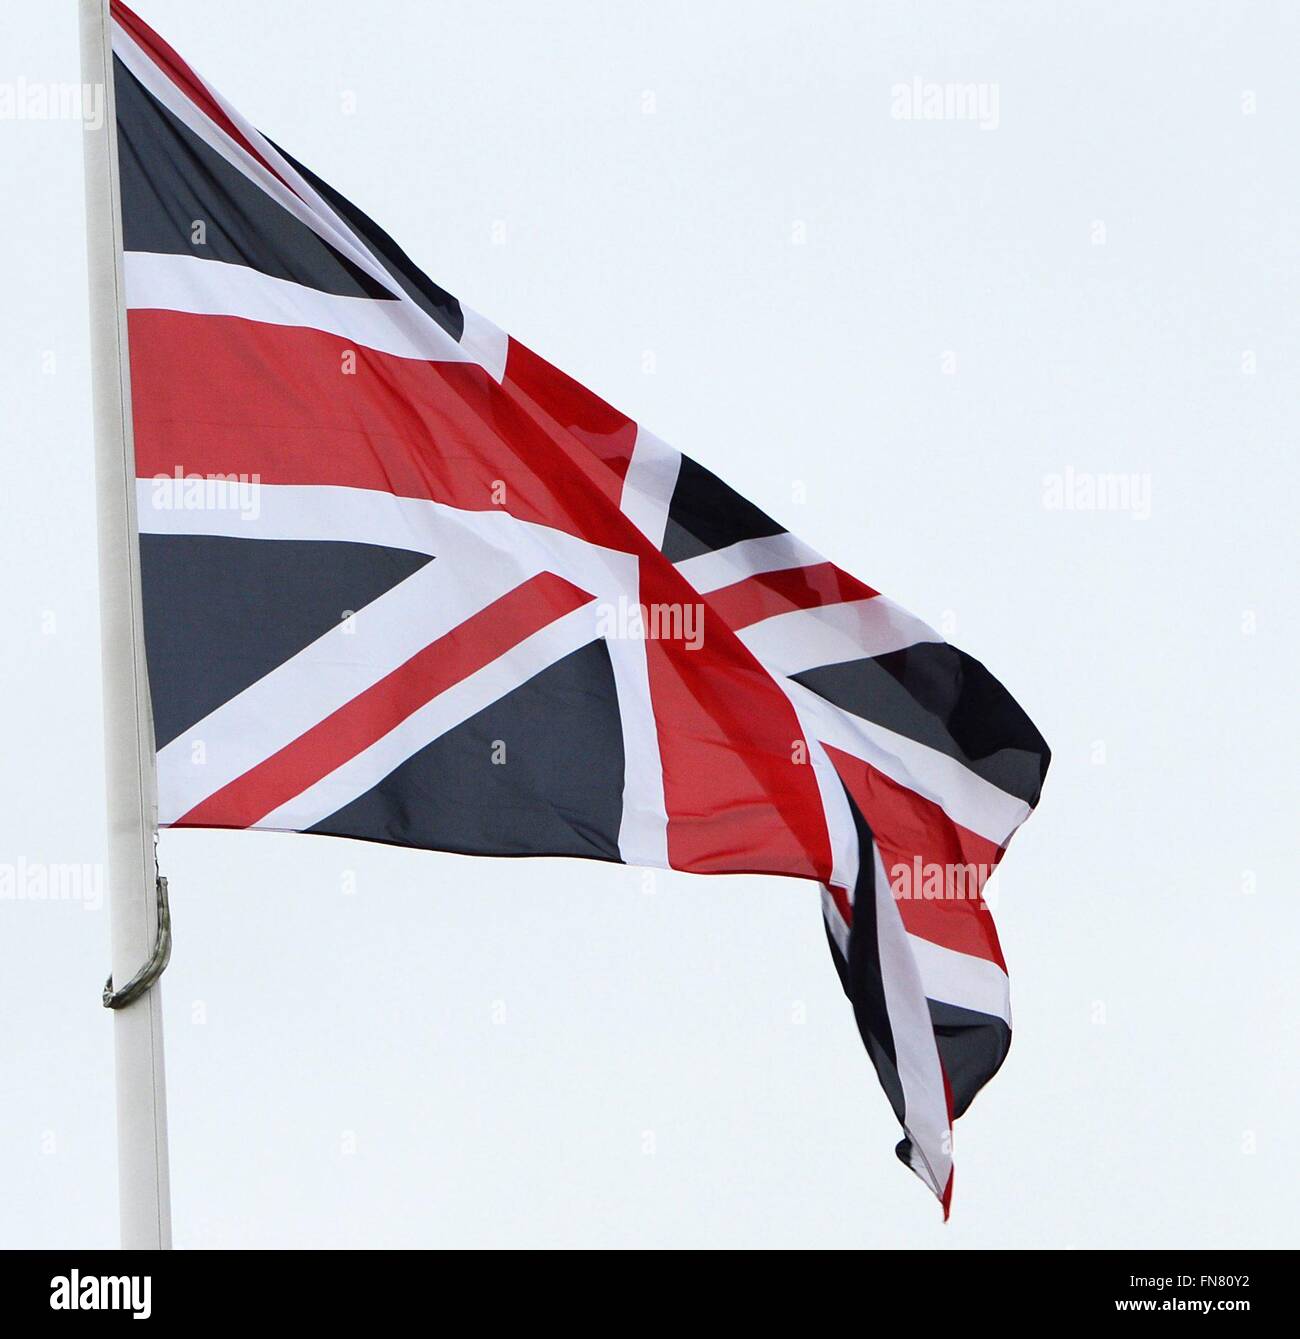 The British flag is waving in Luxembourg, Jan. 8, 2016. Stock Photo